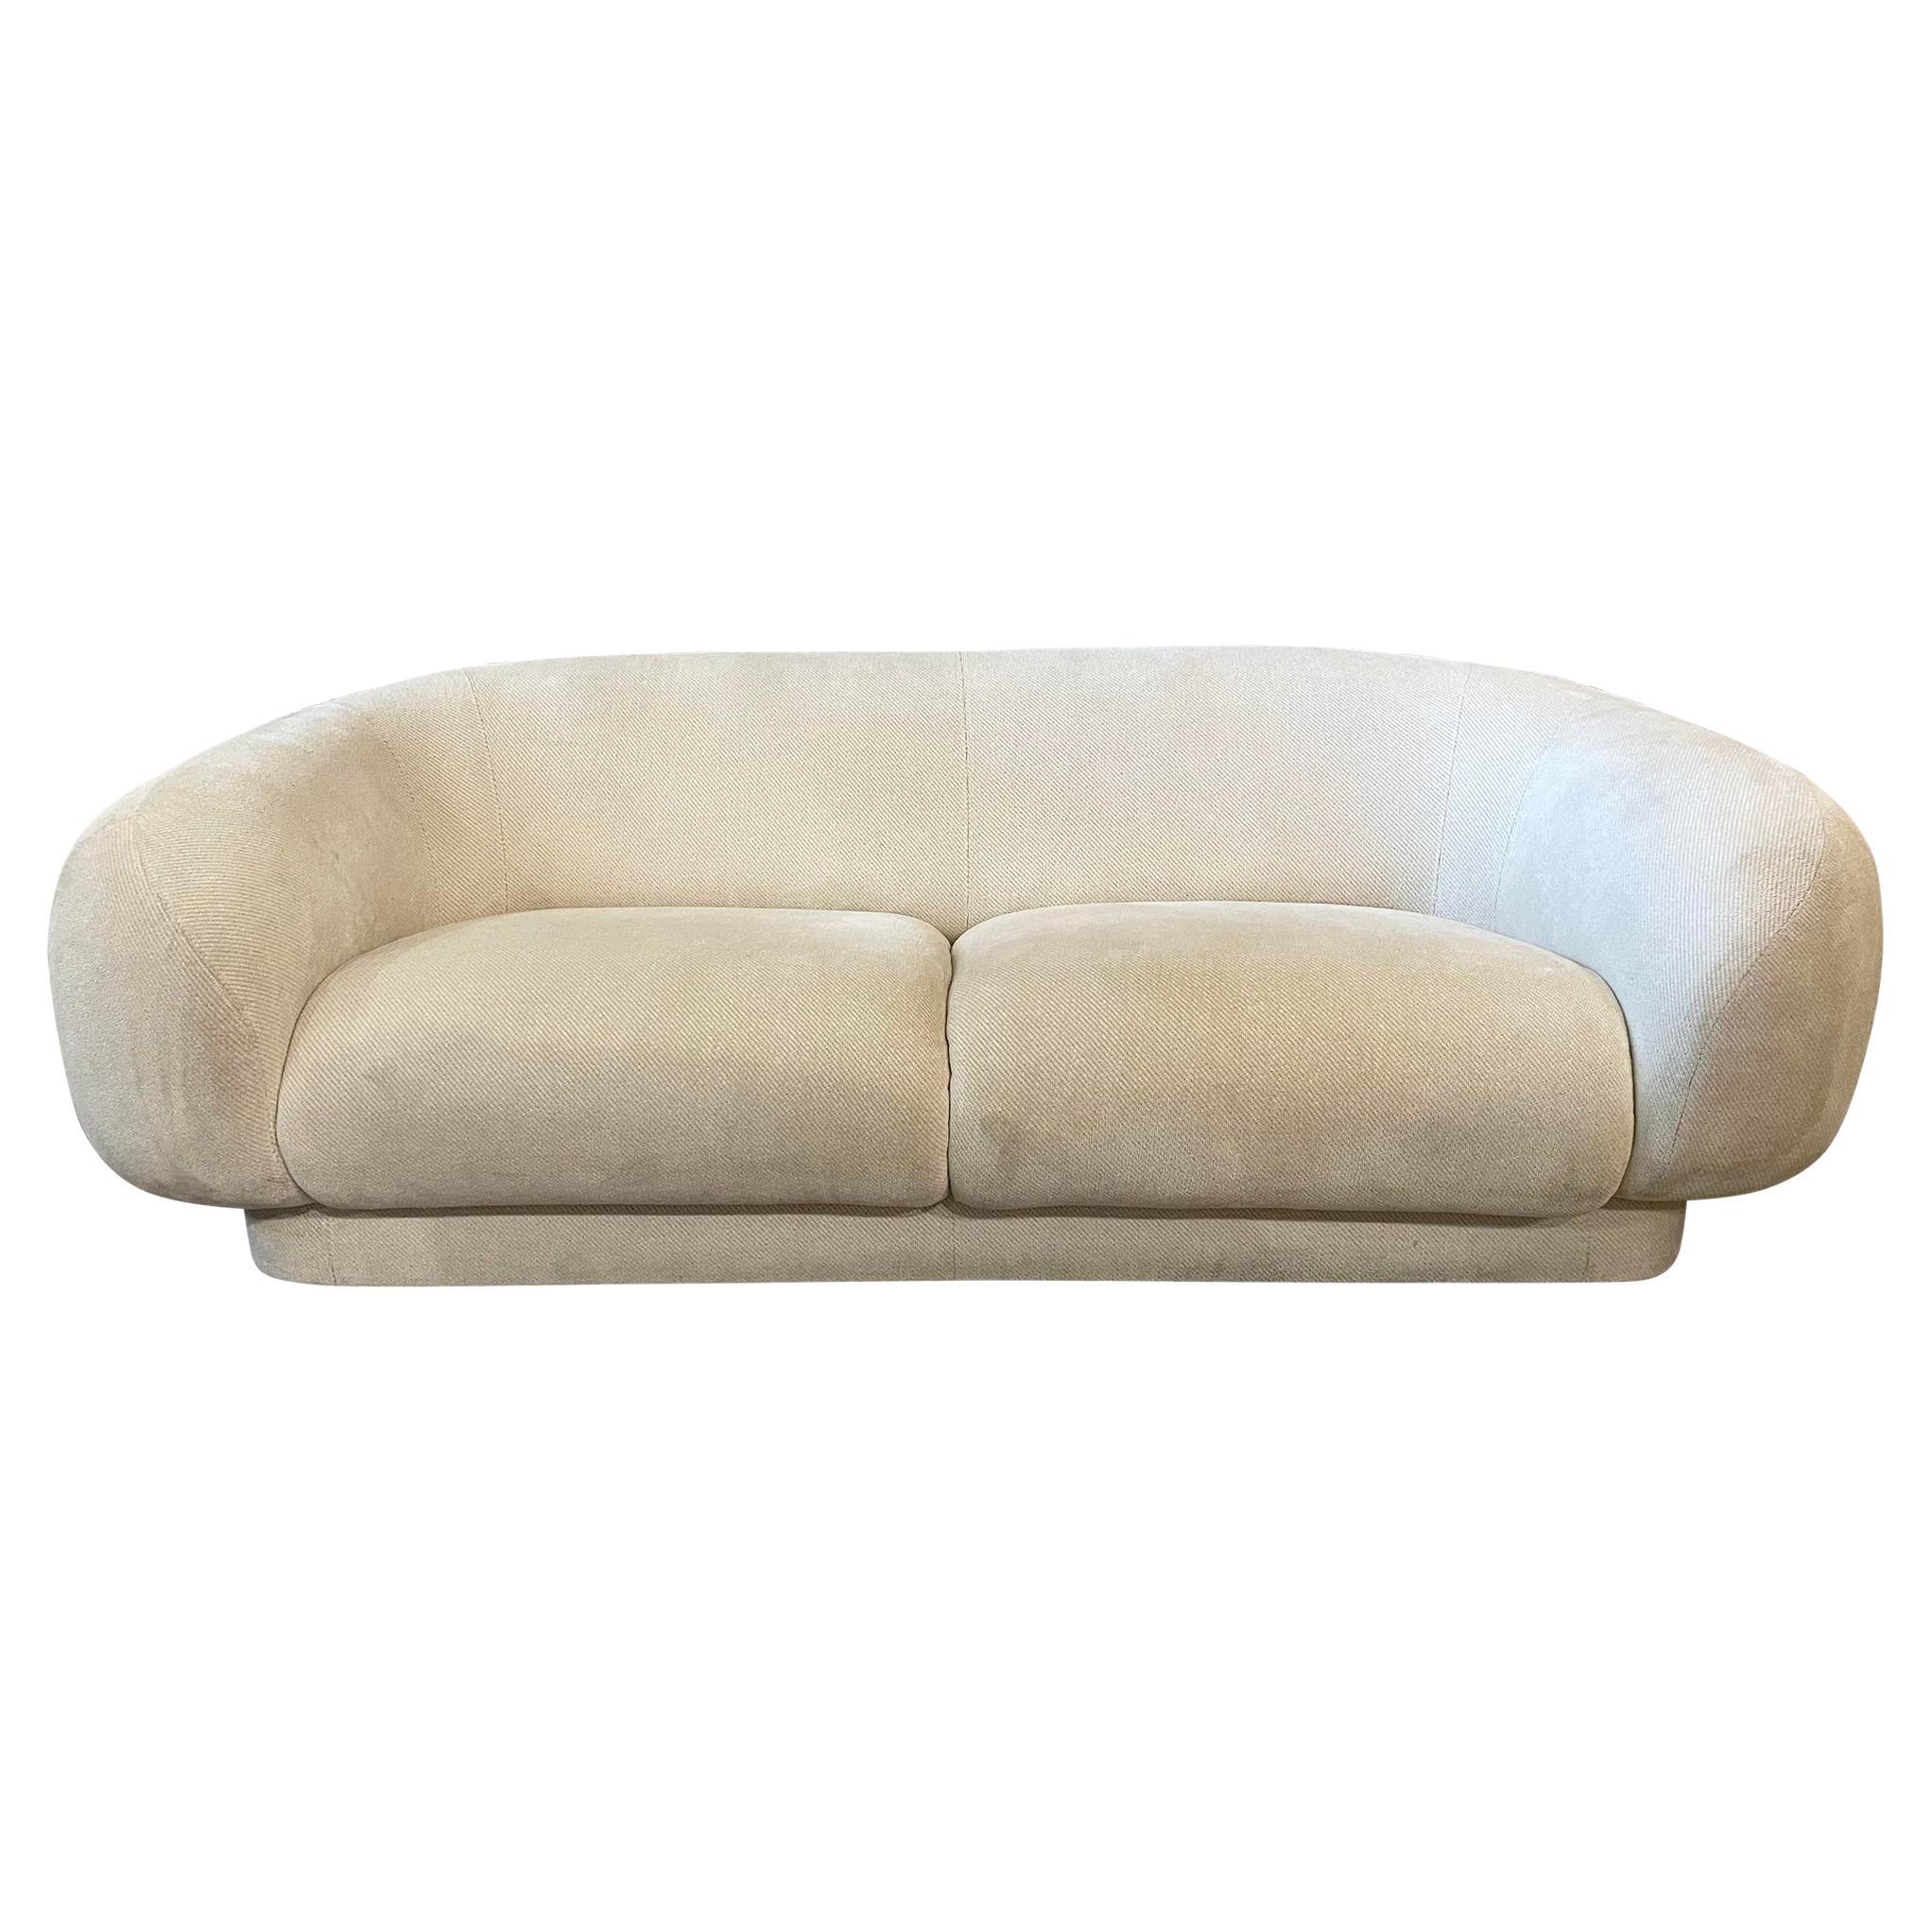 Directional Post Modern Sofa with Rounded Arms